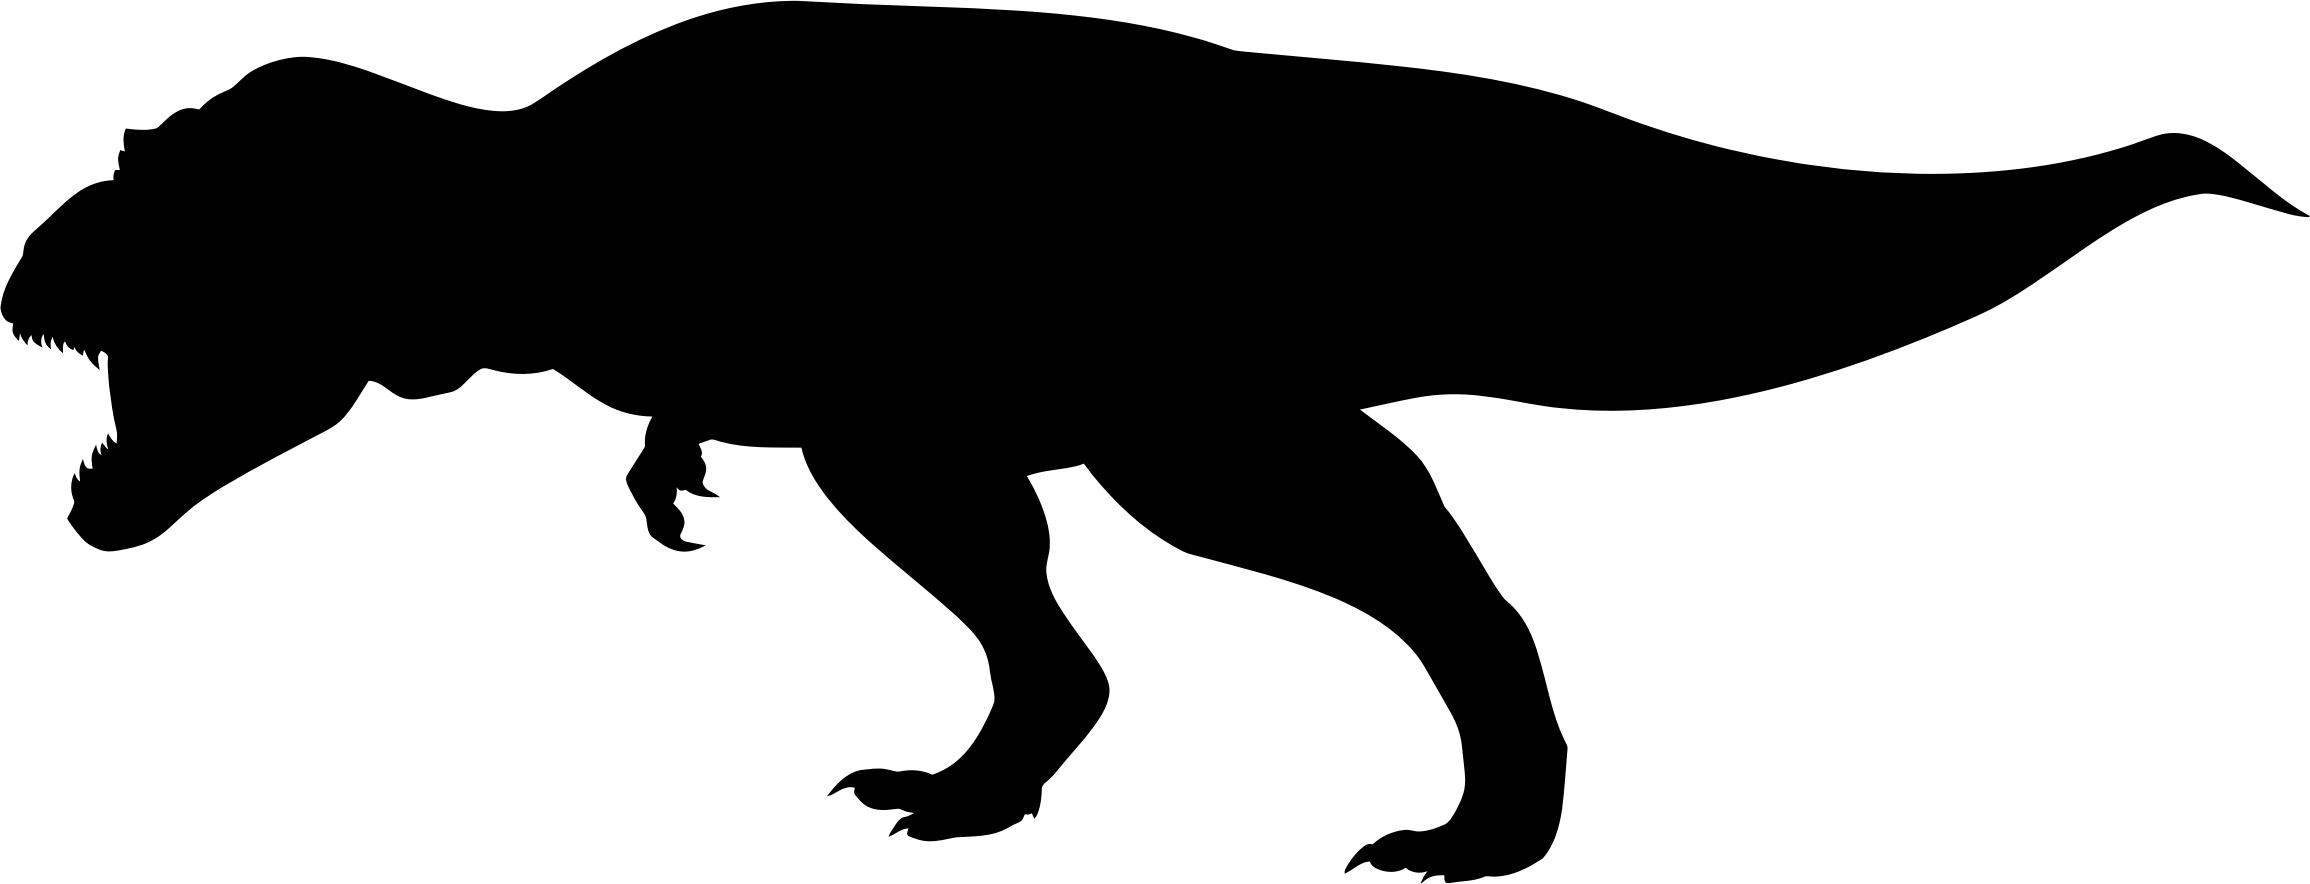 Tyrannosaurus Rex Silhouette png icons